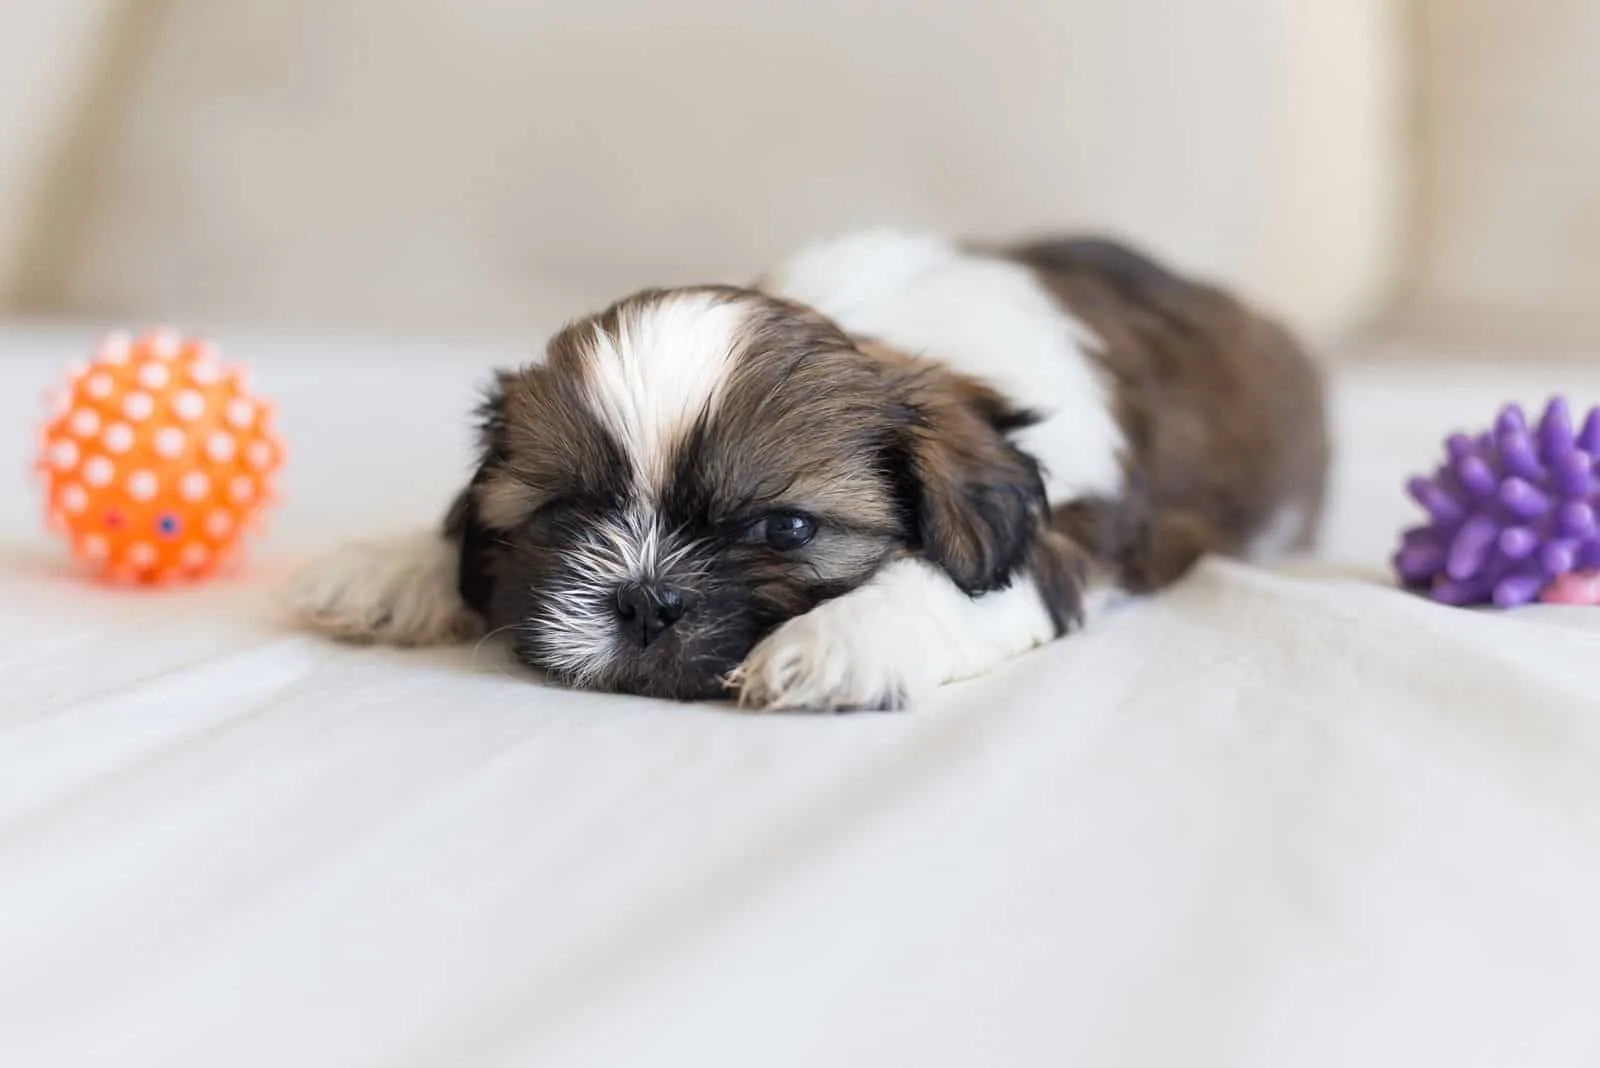 Furry Shih-Tzu puppy is sleeping with two his toys